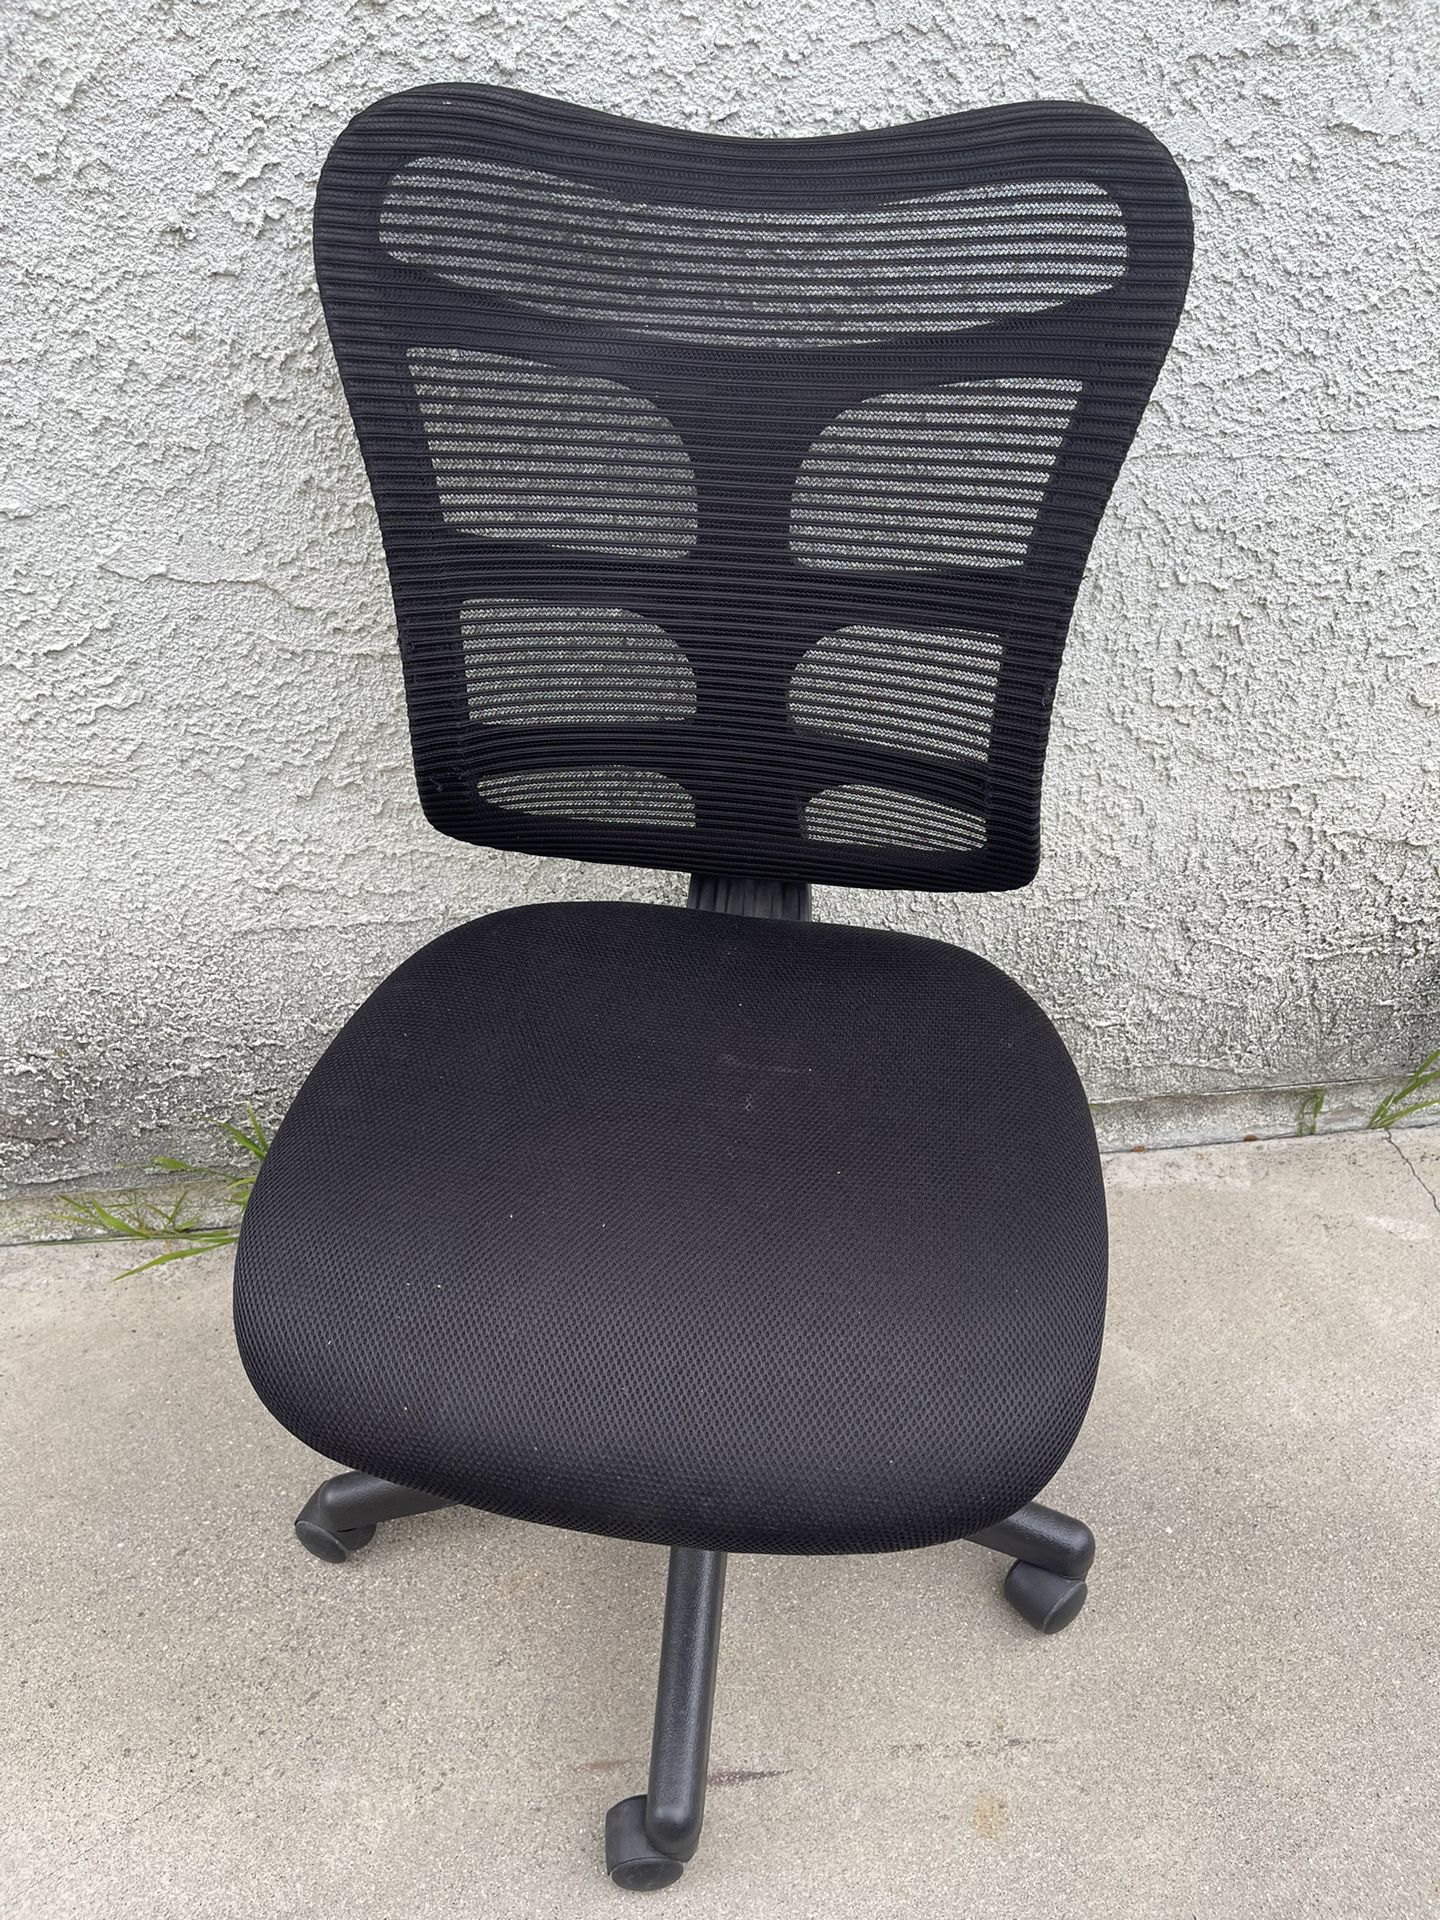 Ergonomic Black Office Chair with Adjustable Features